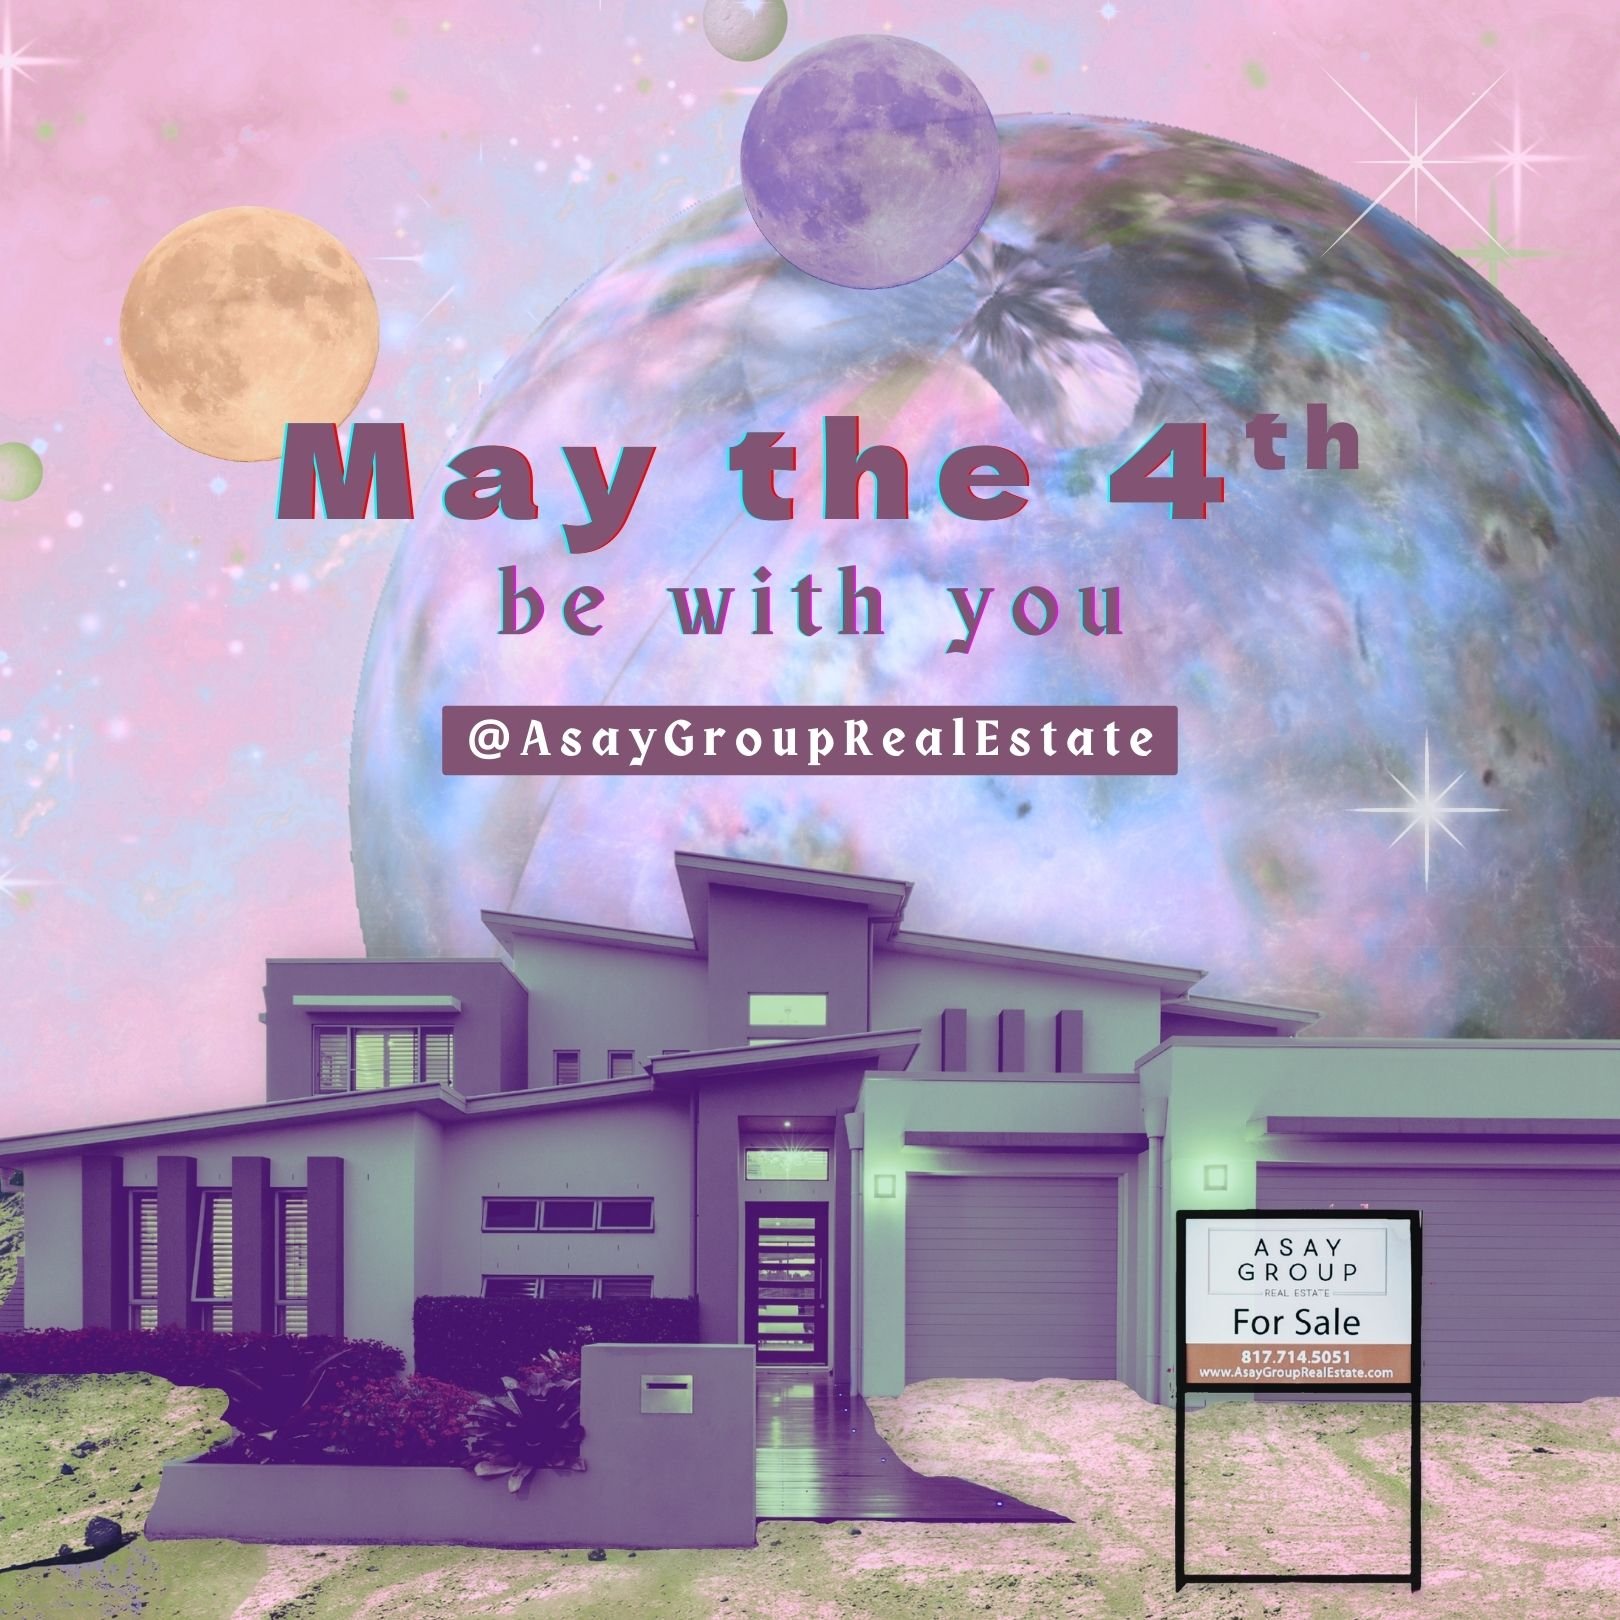 🚀 Helping you find your dream home in every galaxy, even the ones far, far away. #maythefourthbewithyou #starwarsday 🌌

#starwarsday #starwars #may4 #maythe4thbewithyou #jedihomesales #tatoonine #fortworthrealtor #dfwrealtor #sellyourhouse #realest